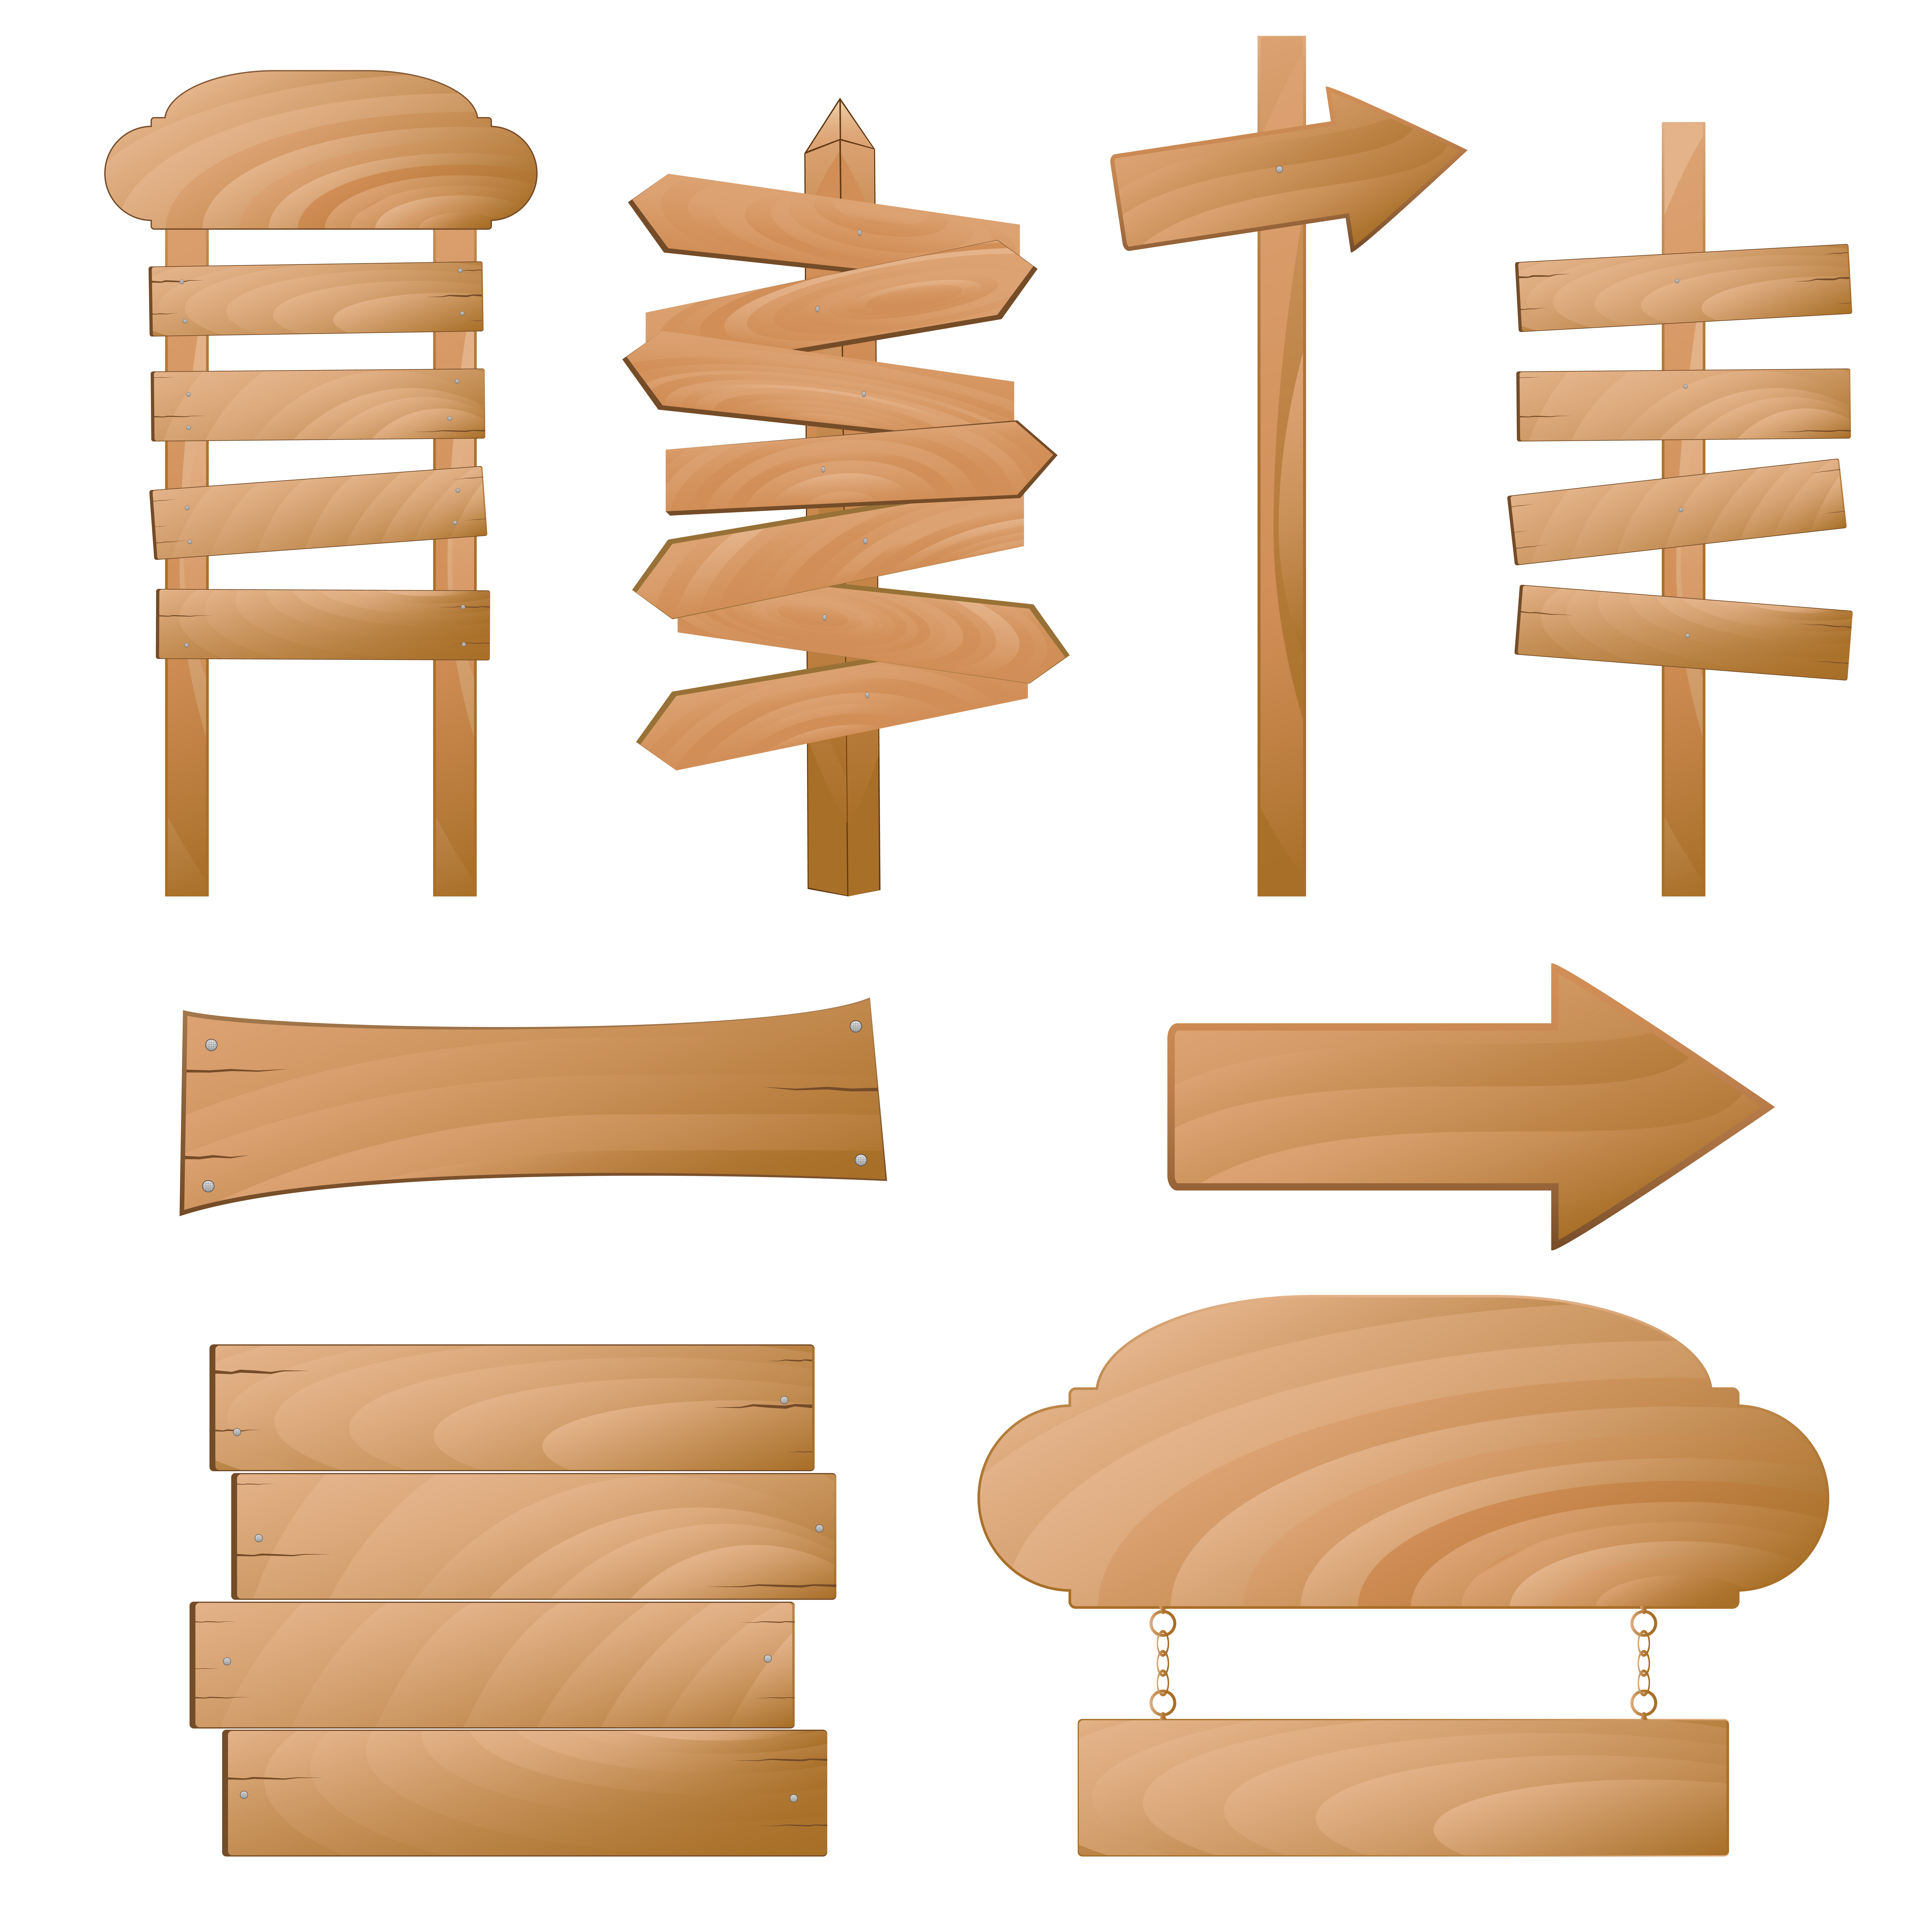 wood signs vector